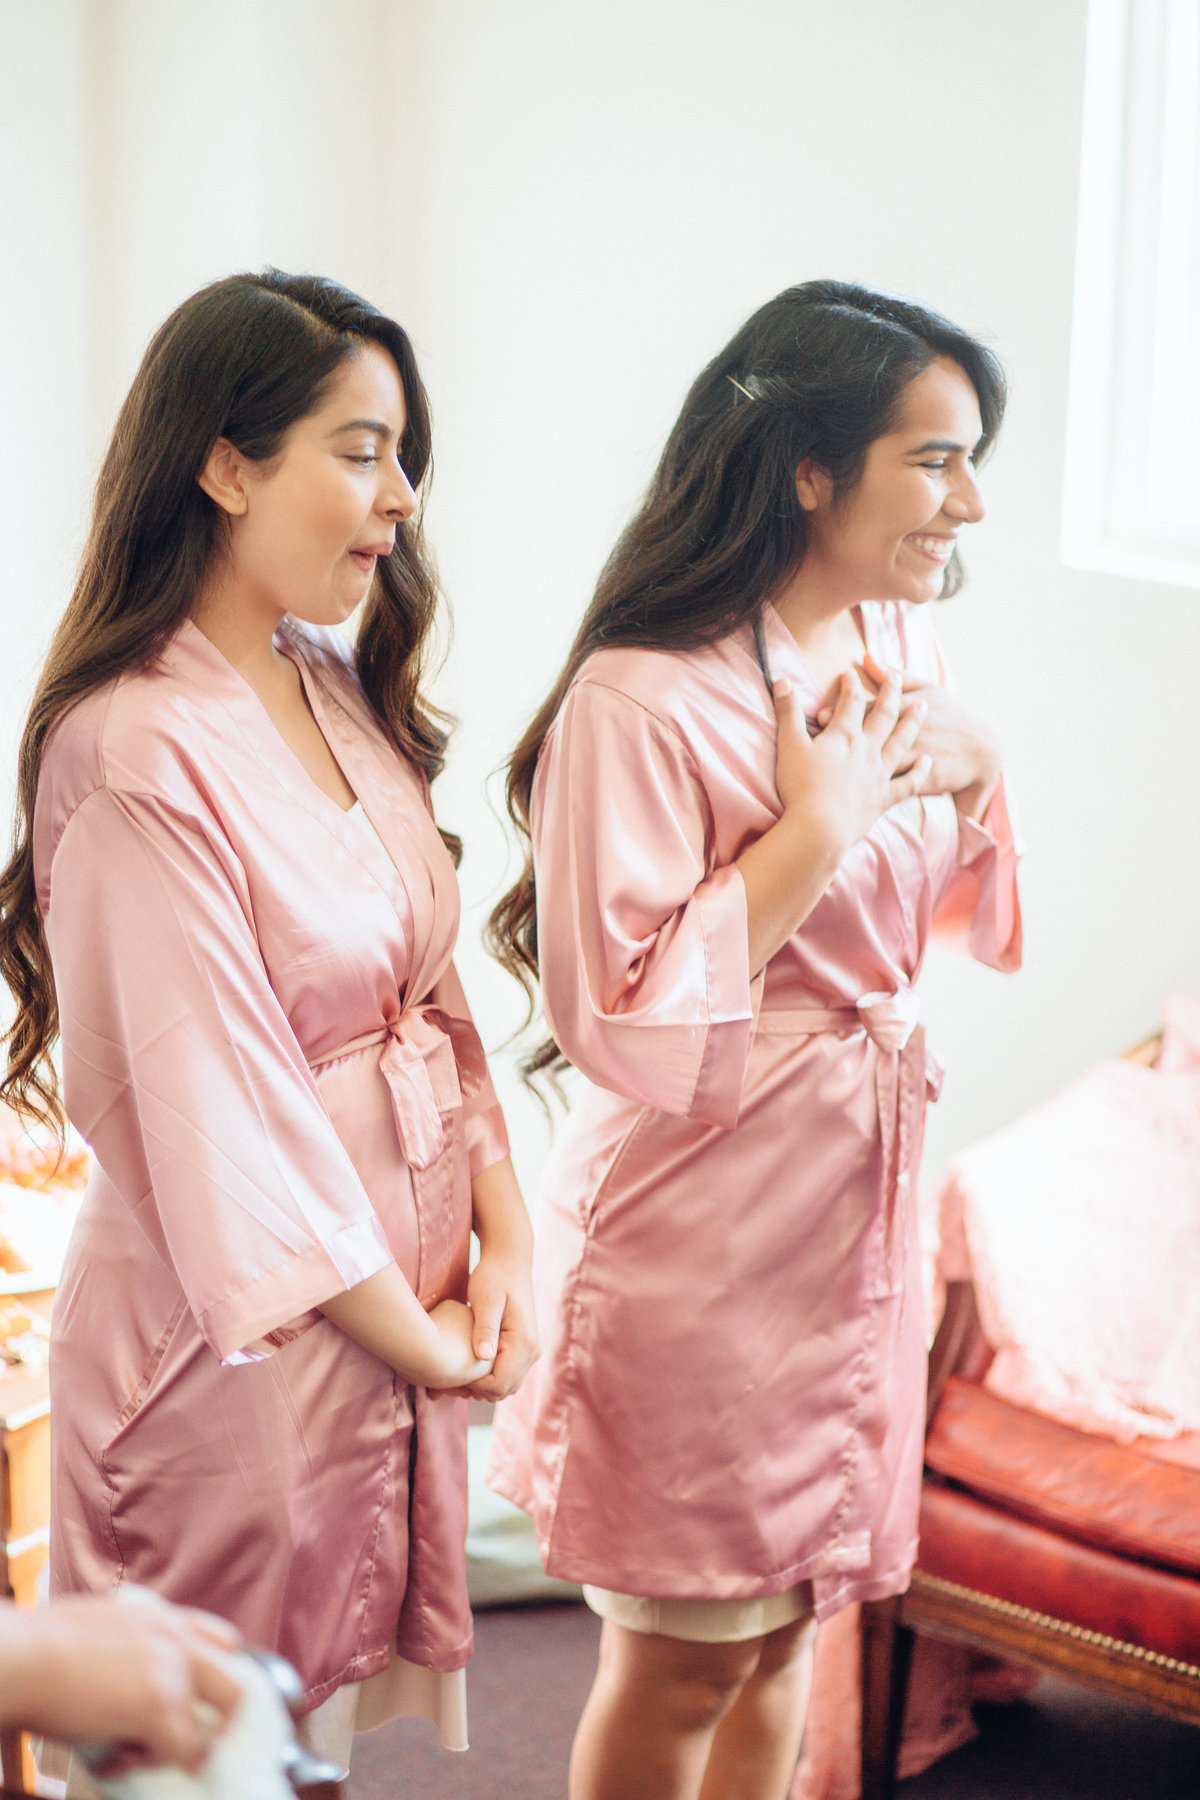 Wedding Photograph Of Two Women in Pink Robe Los Angeles